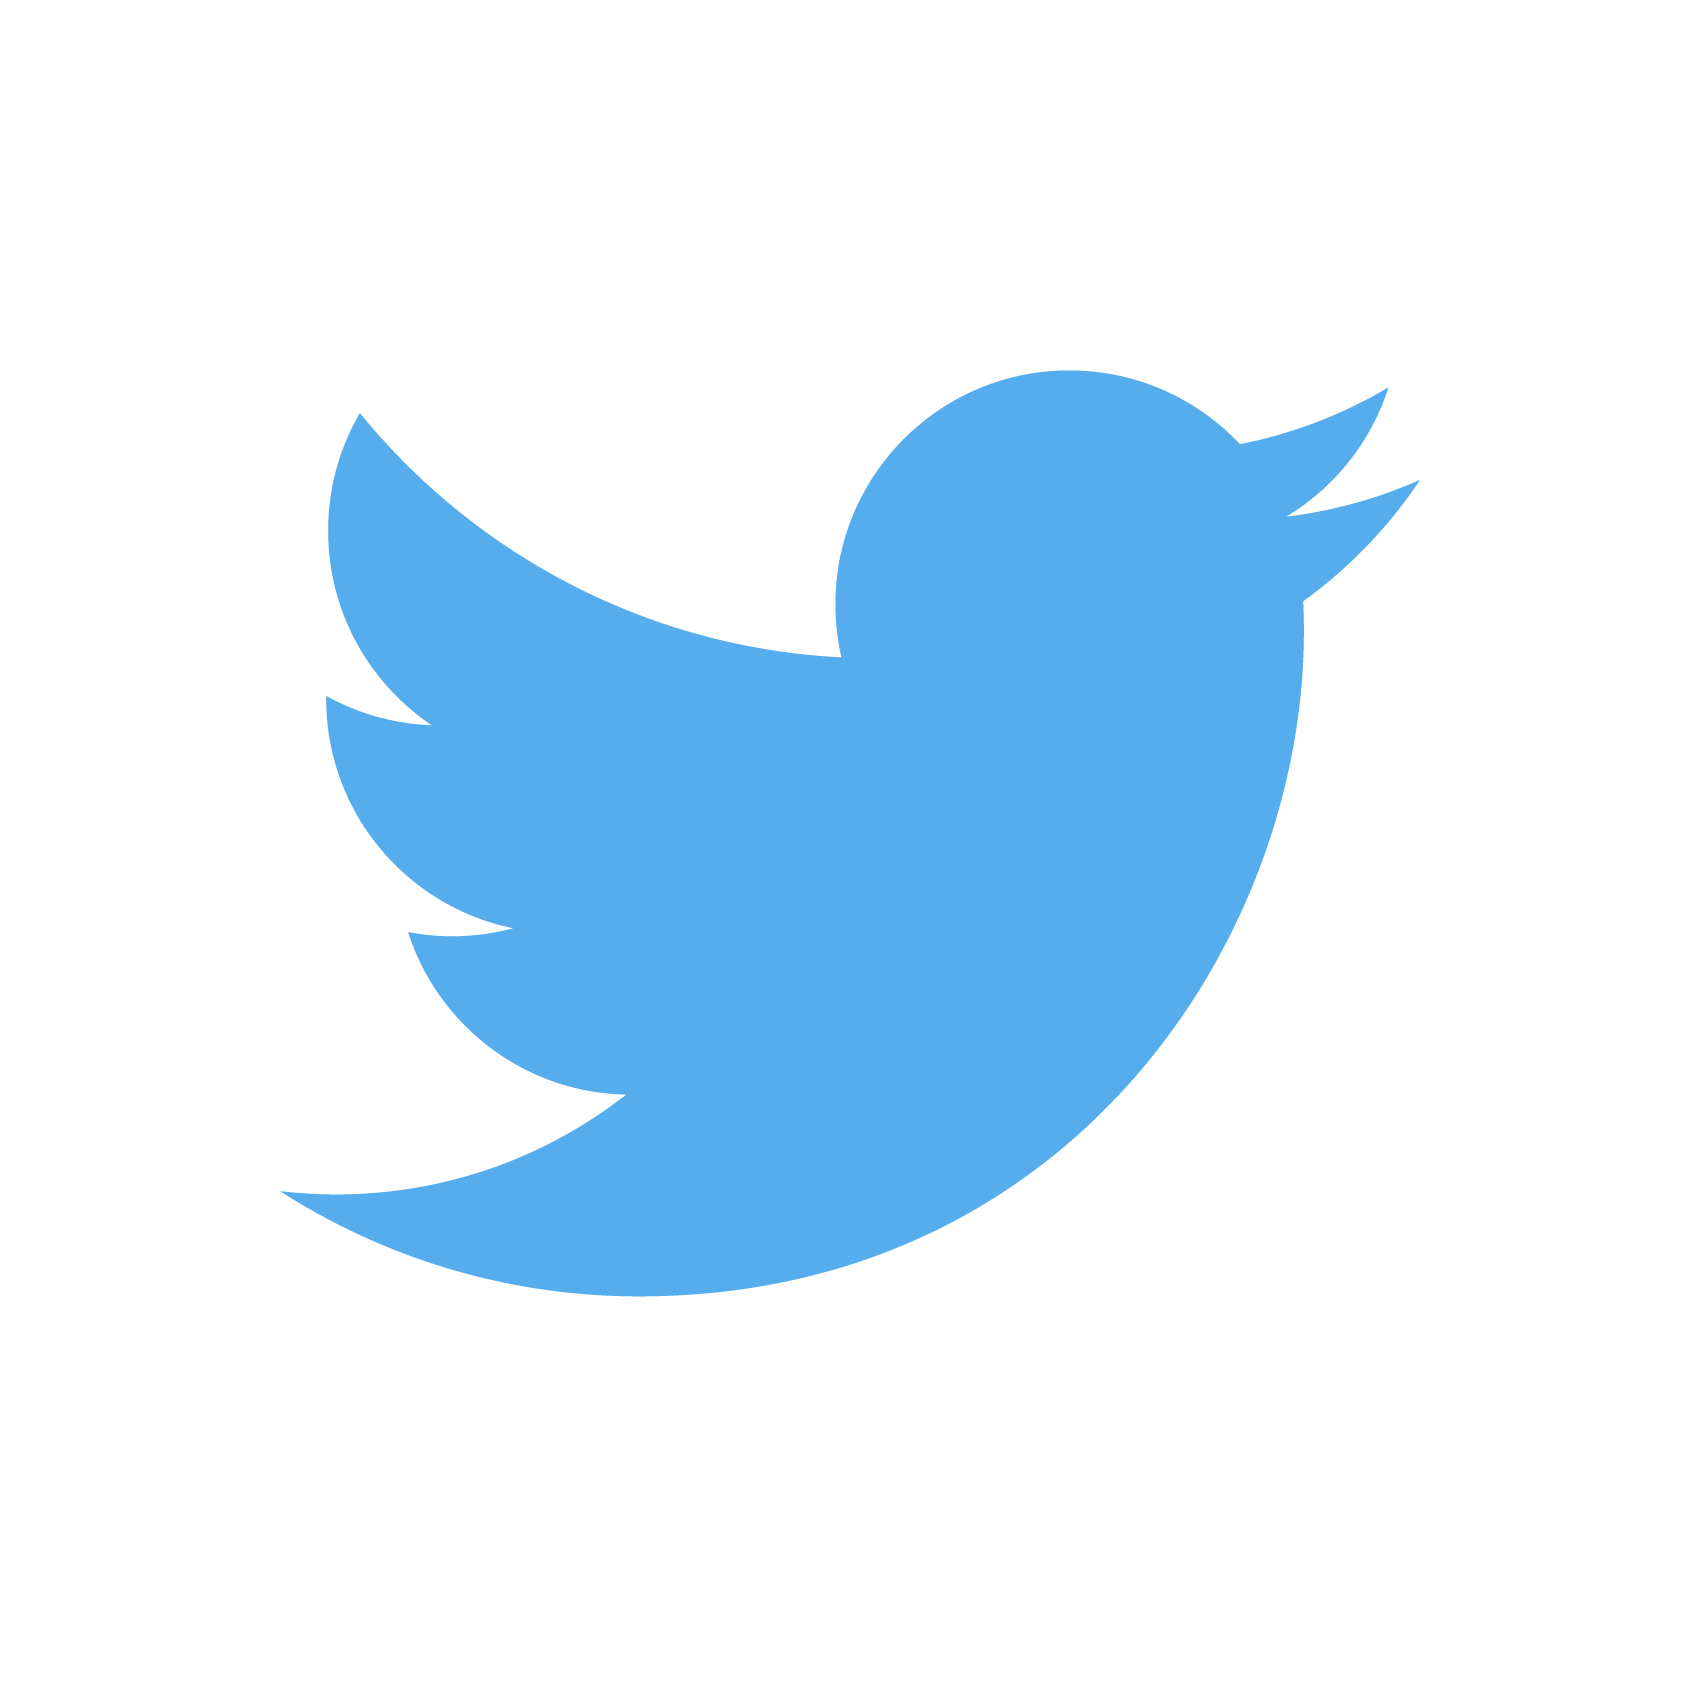 Twitter Logo, Twitter 2020 Terms of Service